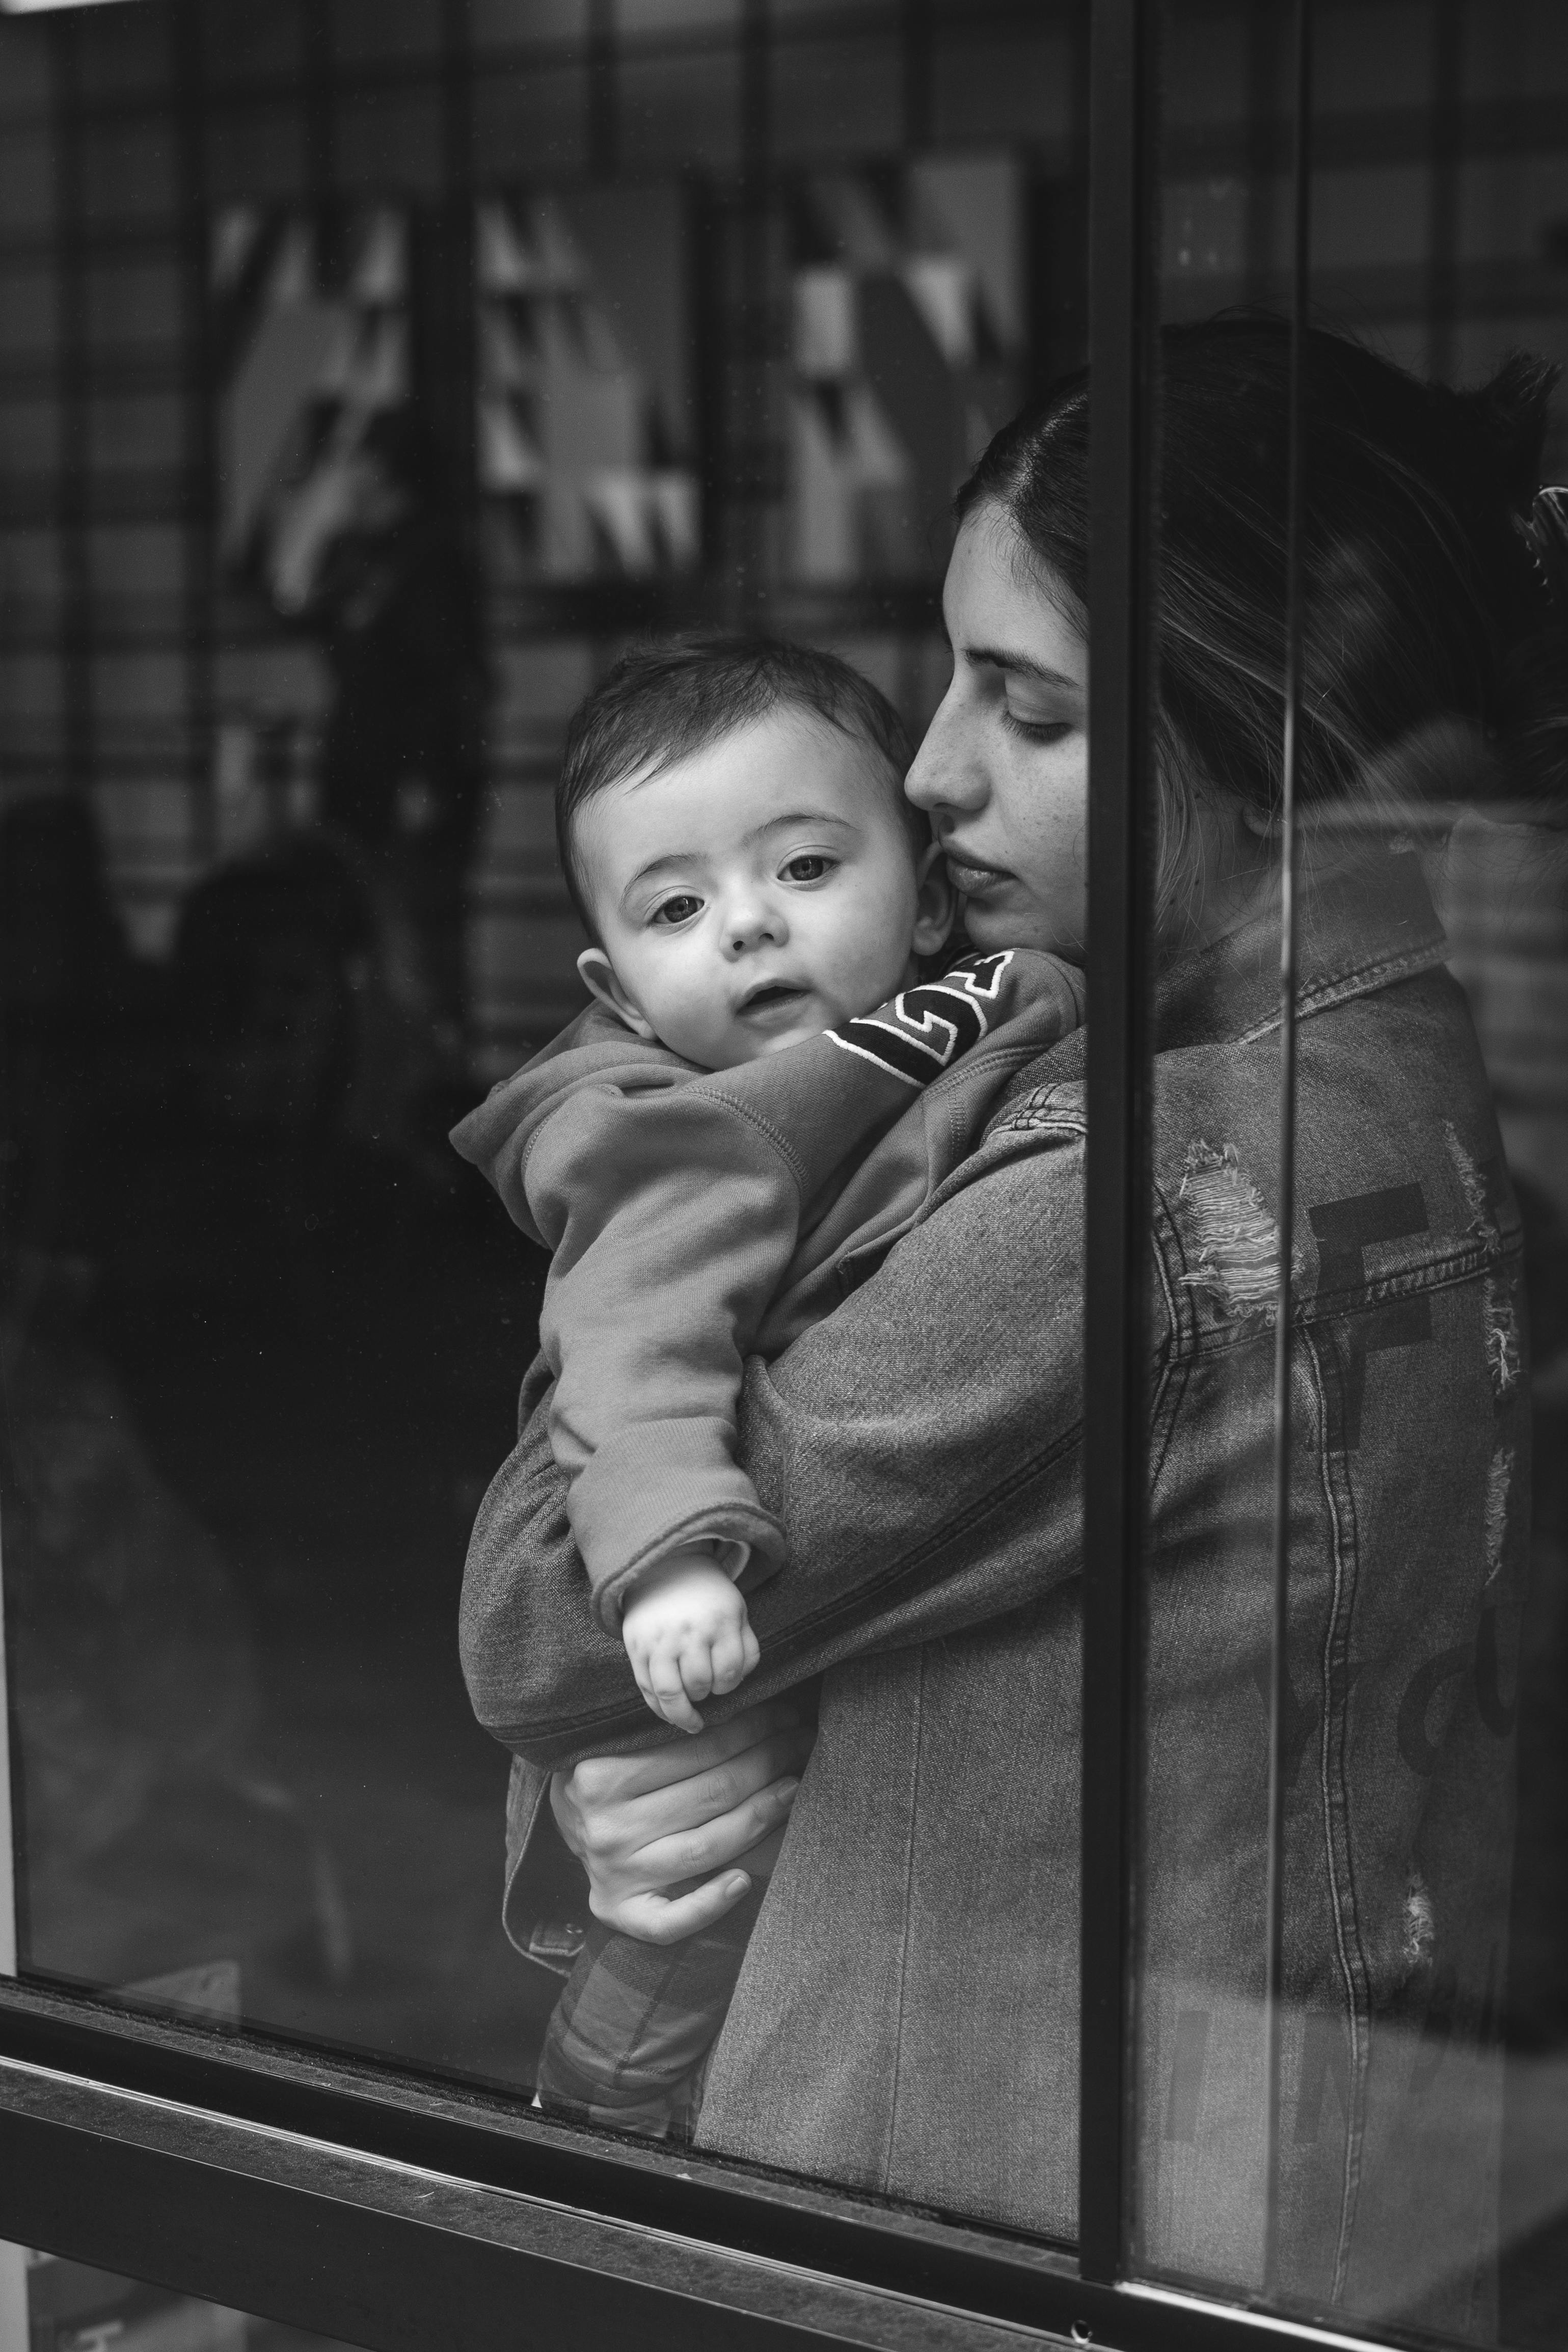 A woman and her baby | Source: Pexels